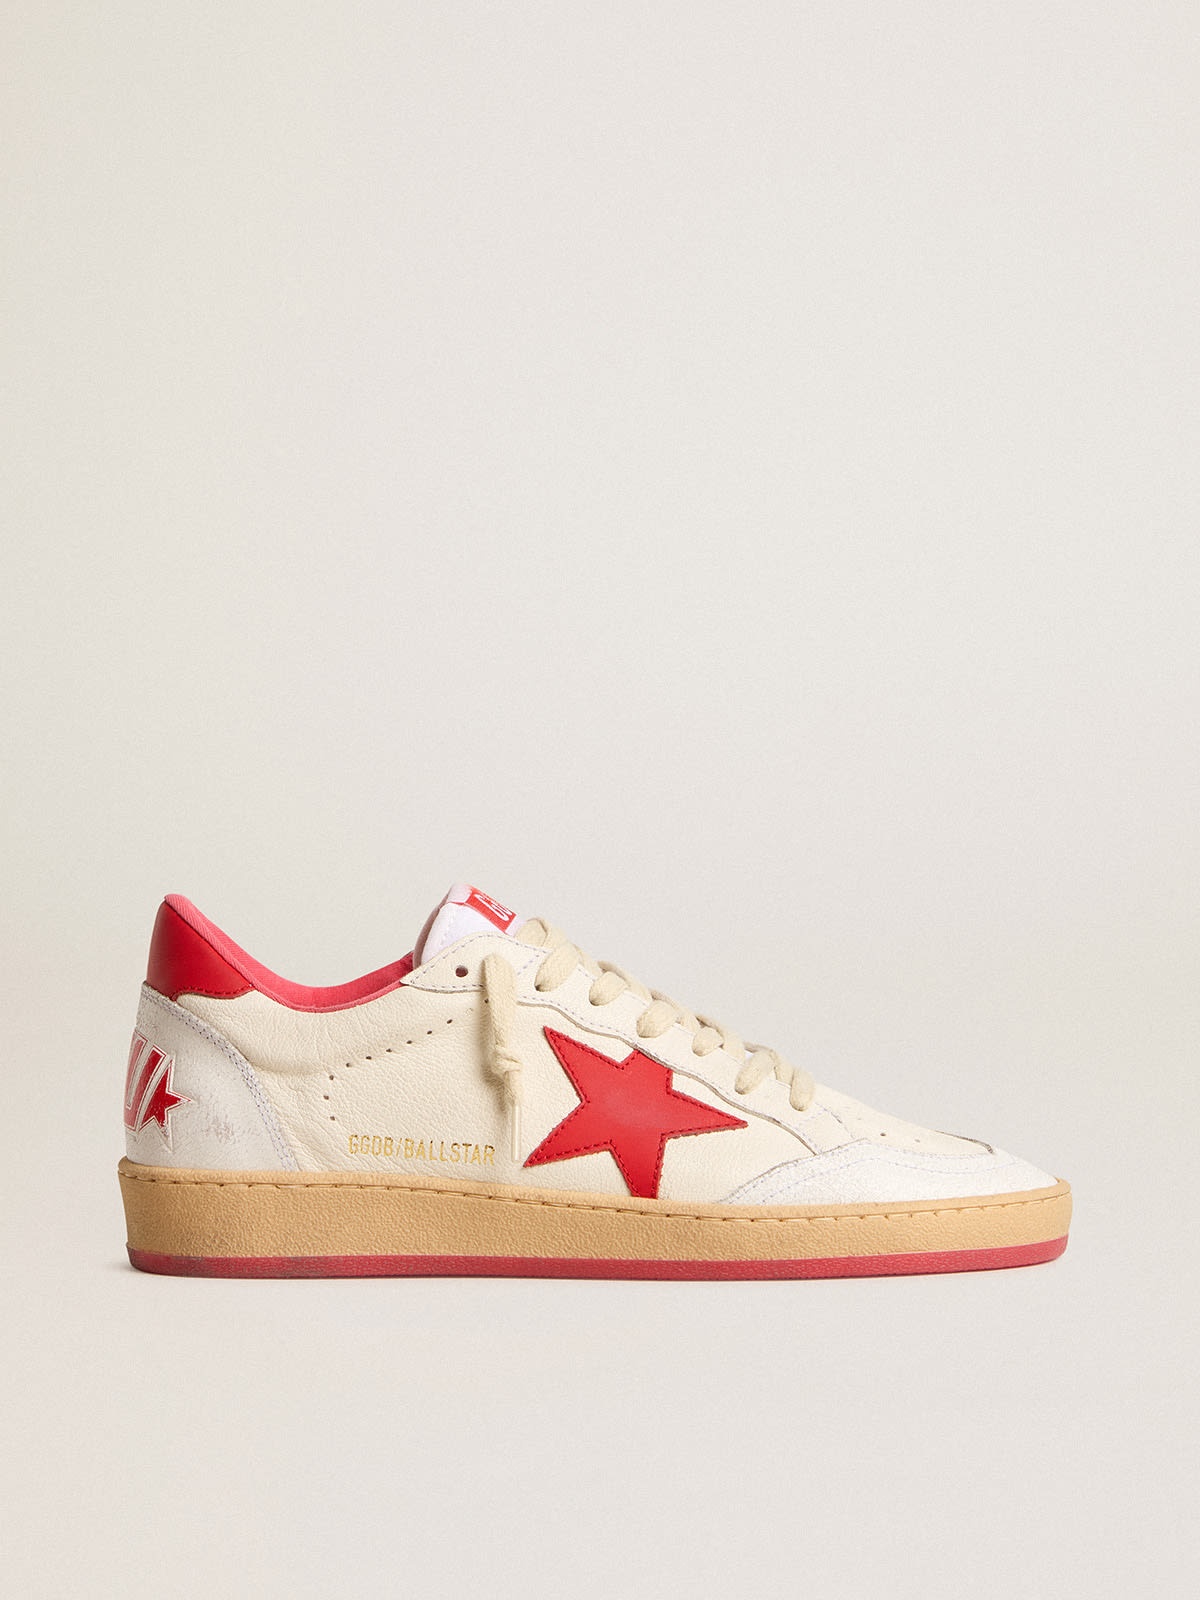 Women’s Ball Star  Wishes in white leather with a red star and heel tab - 1